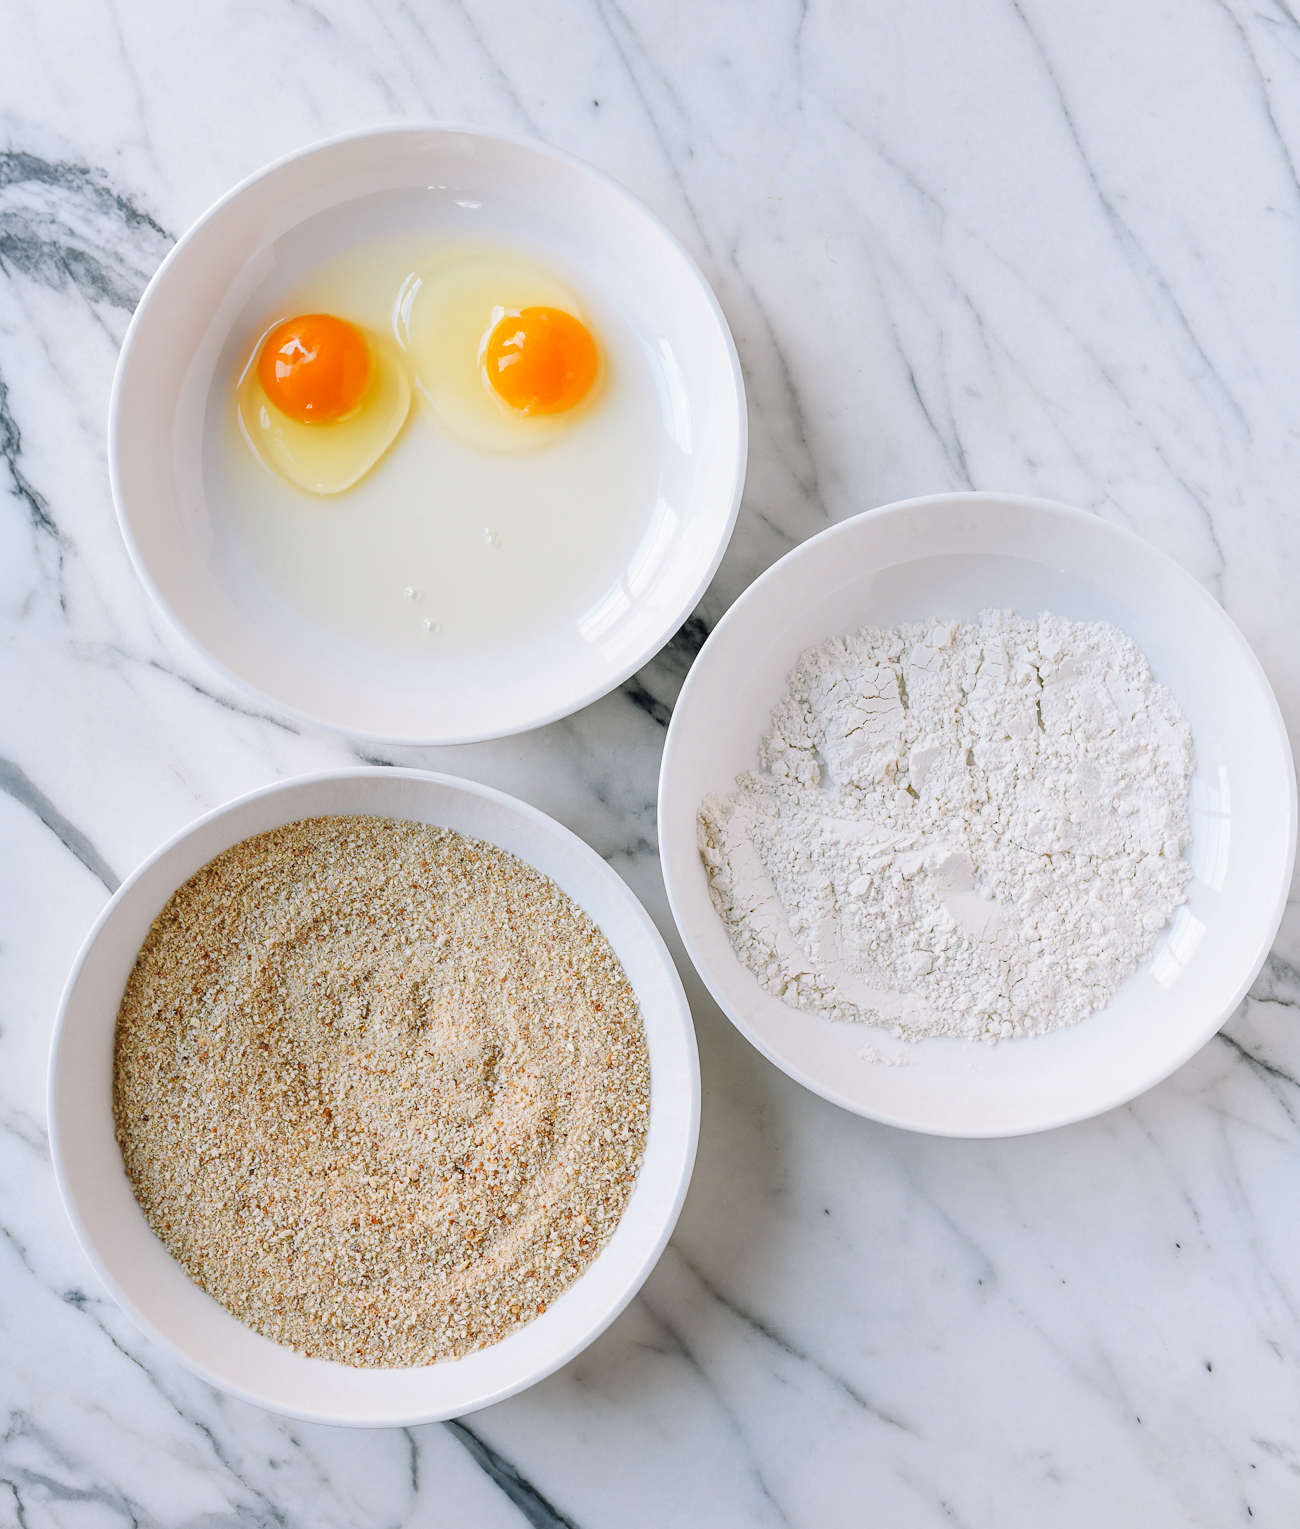 Dishes with egg, flour, and breadcrumbs for dredging